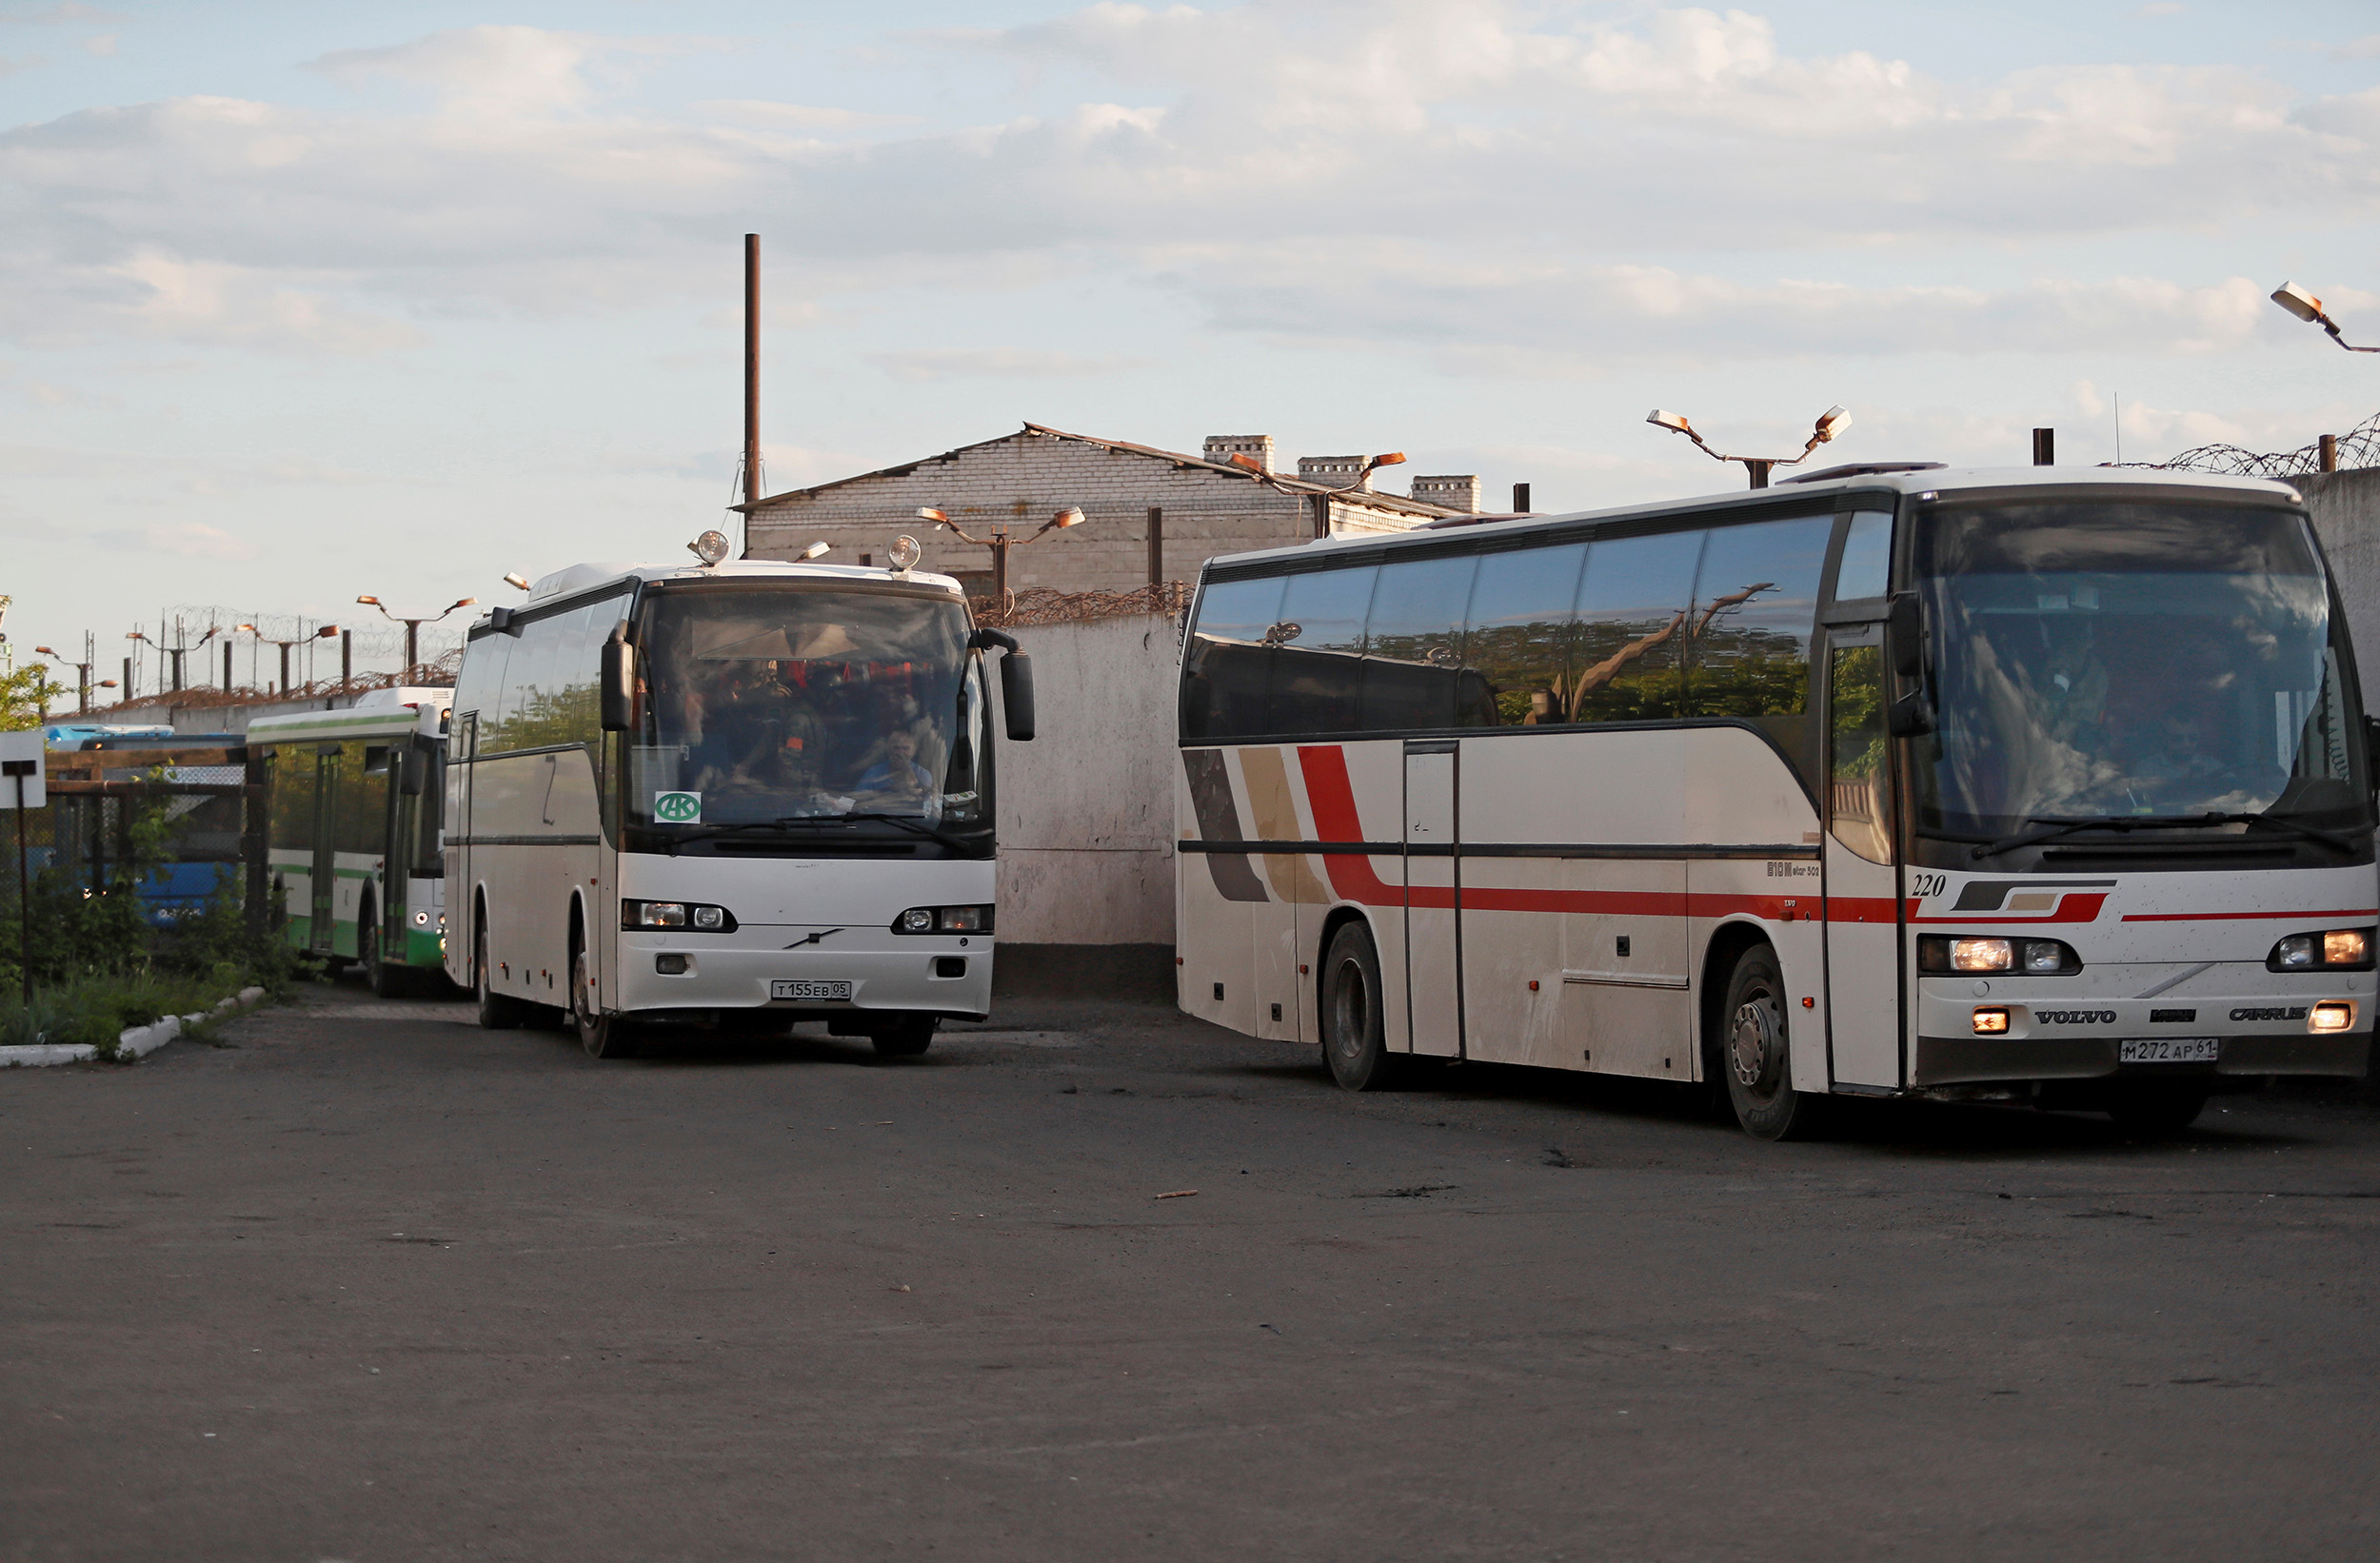 Buses carrying service members of Ukrainian forces arrive under escort of the pro-Russian military at a detention facility in the settlement of Olenivka in the Donetsk Region, Ukraine, on May 17.